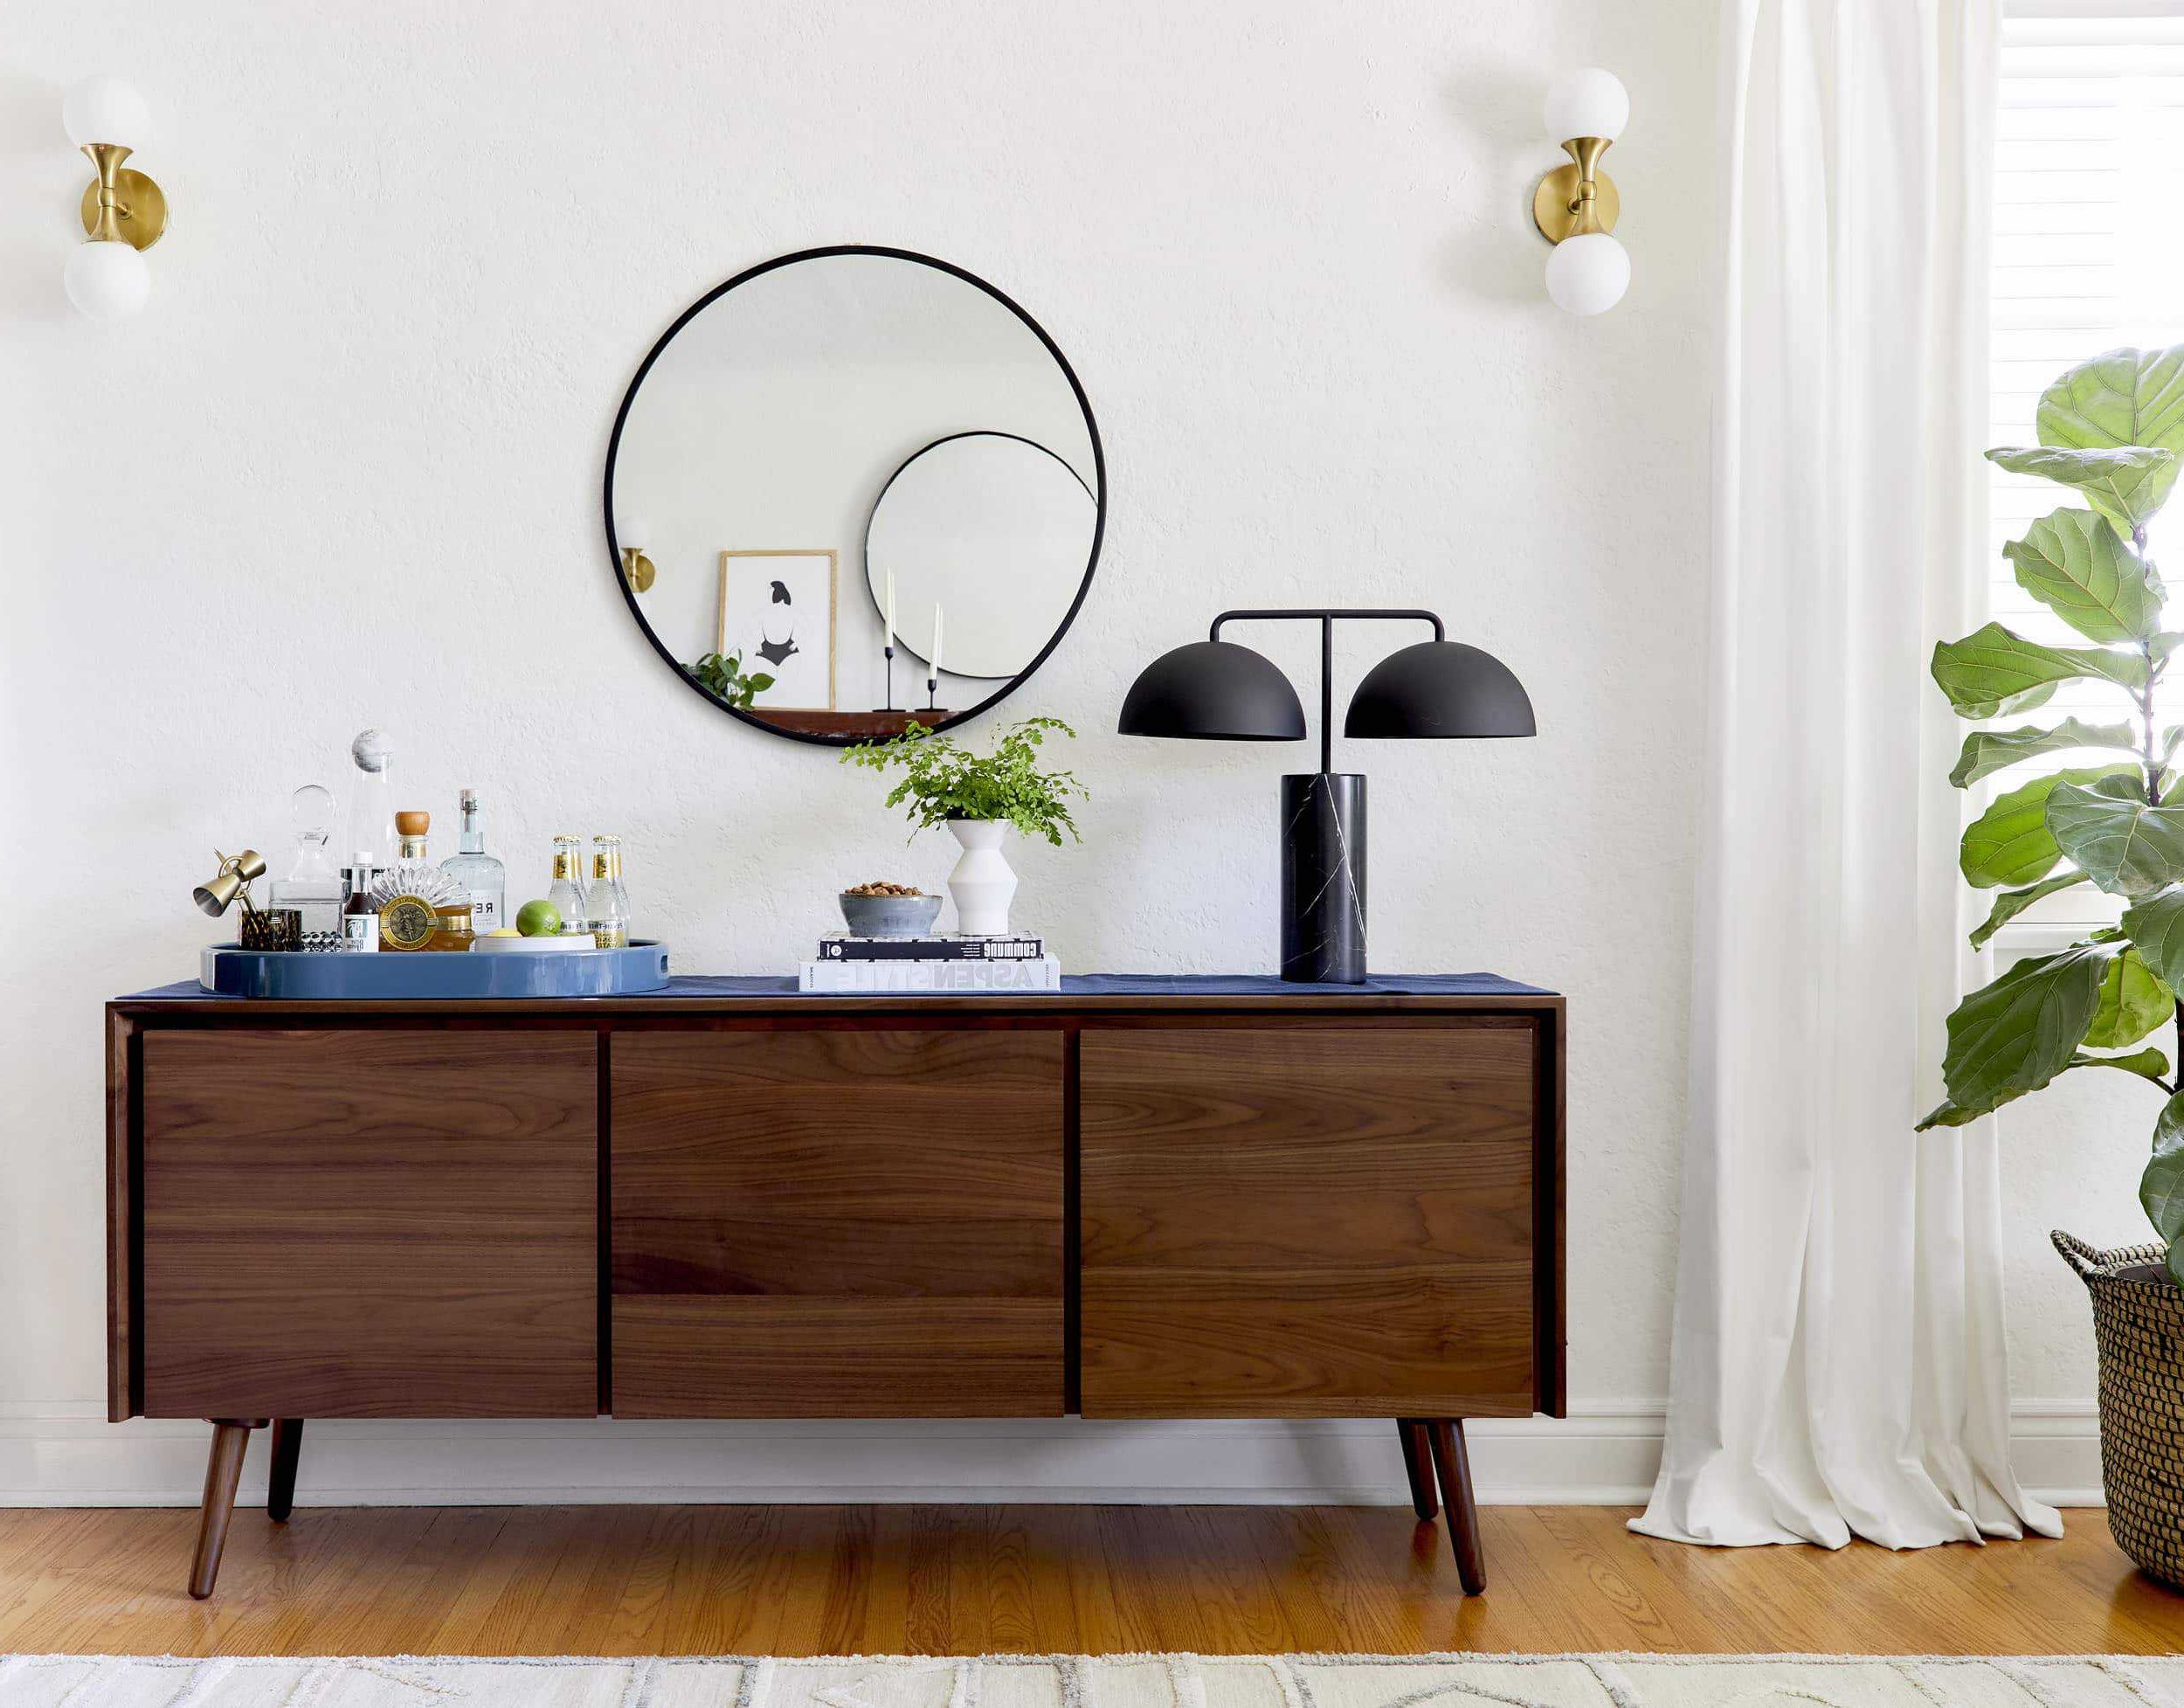 4 Ways To Style That Credenza For "real Life" + Shop Our Favorite Credenzas  – Emily Henderson Pertaining To Credenzas For Living Room (Gallery 11 of 20)